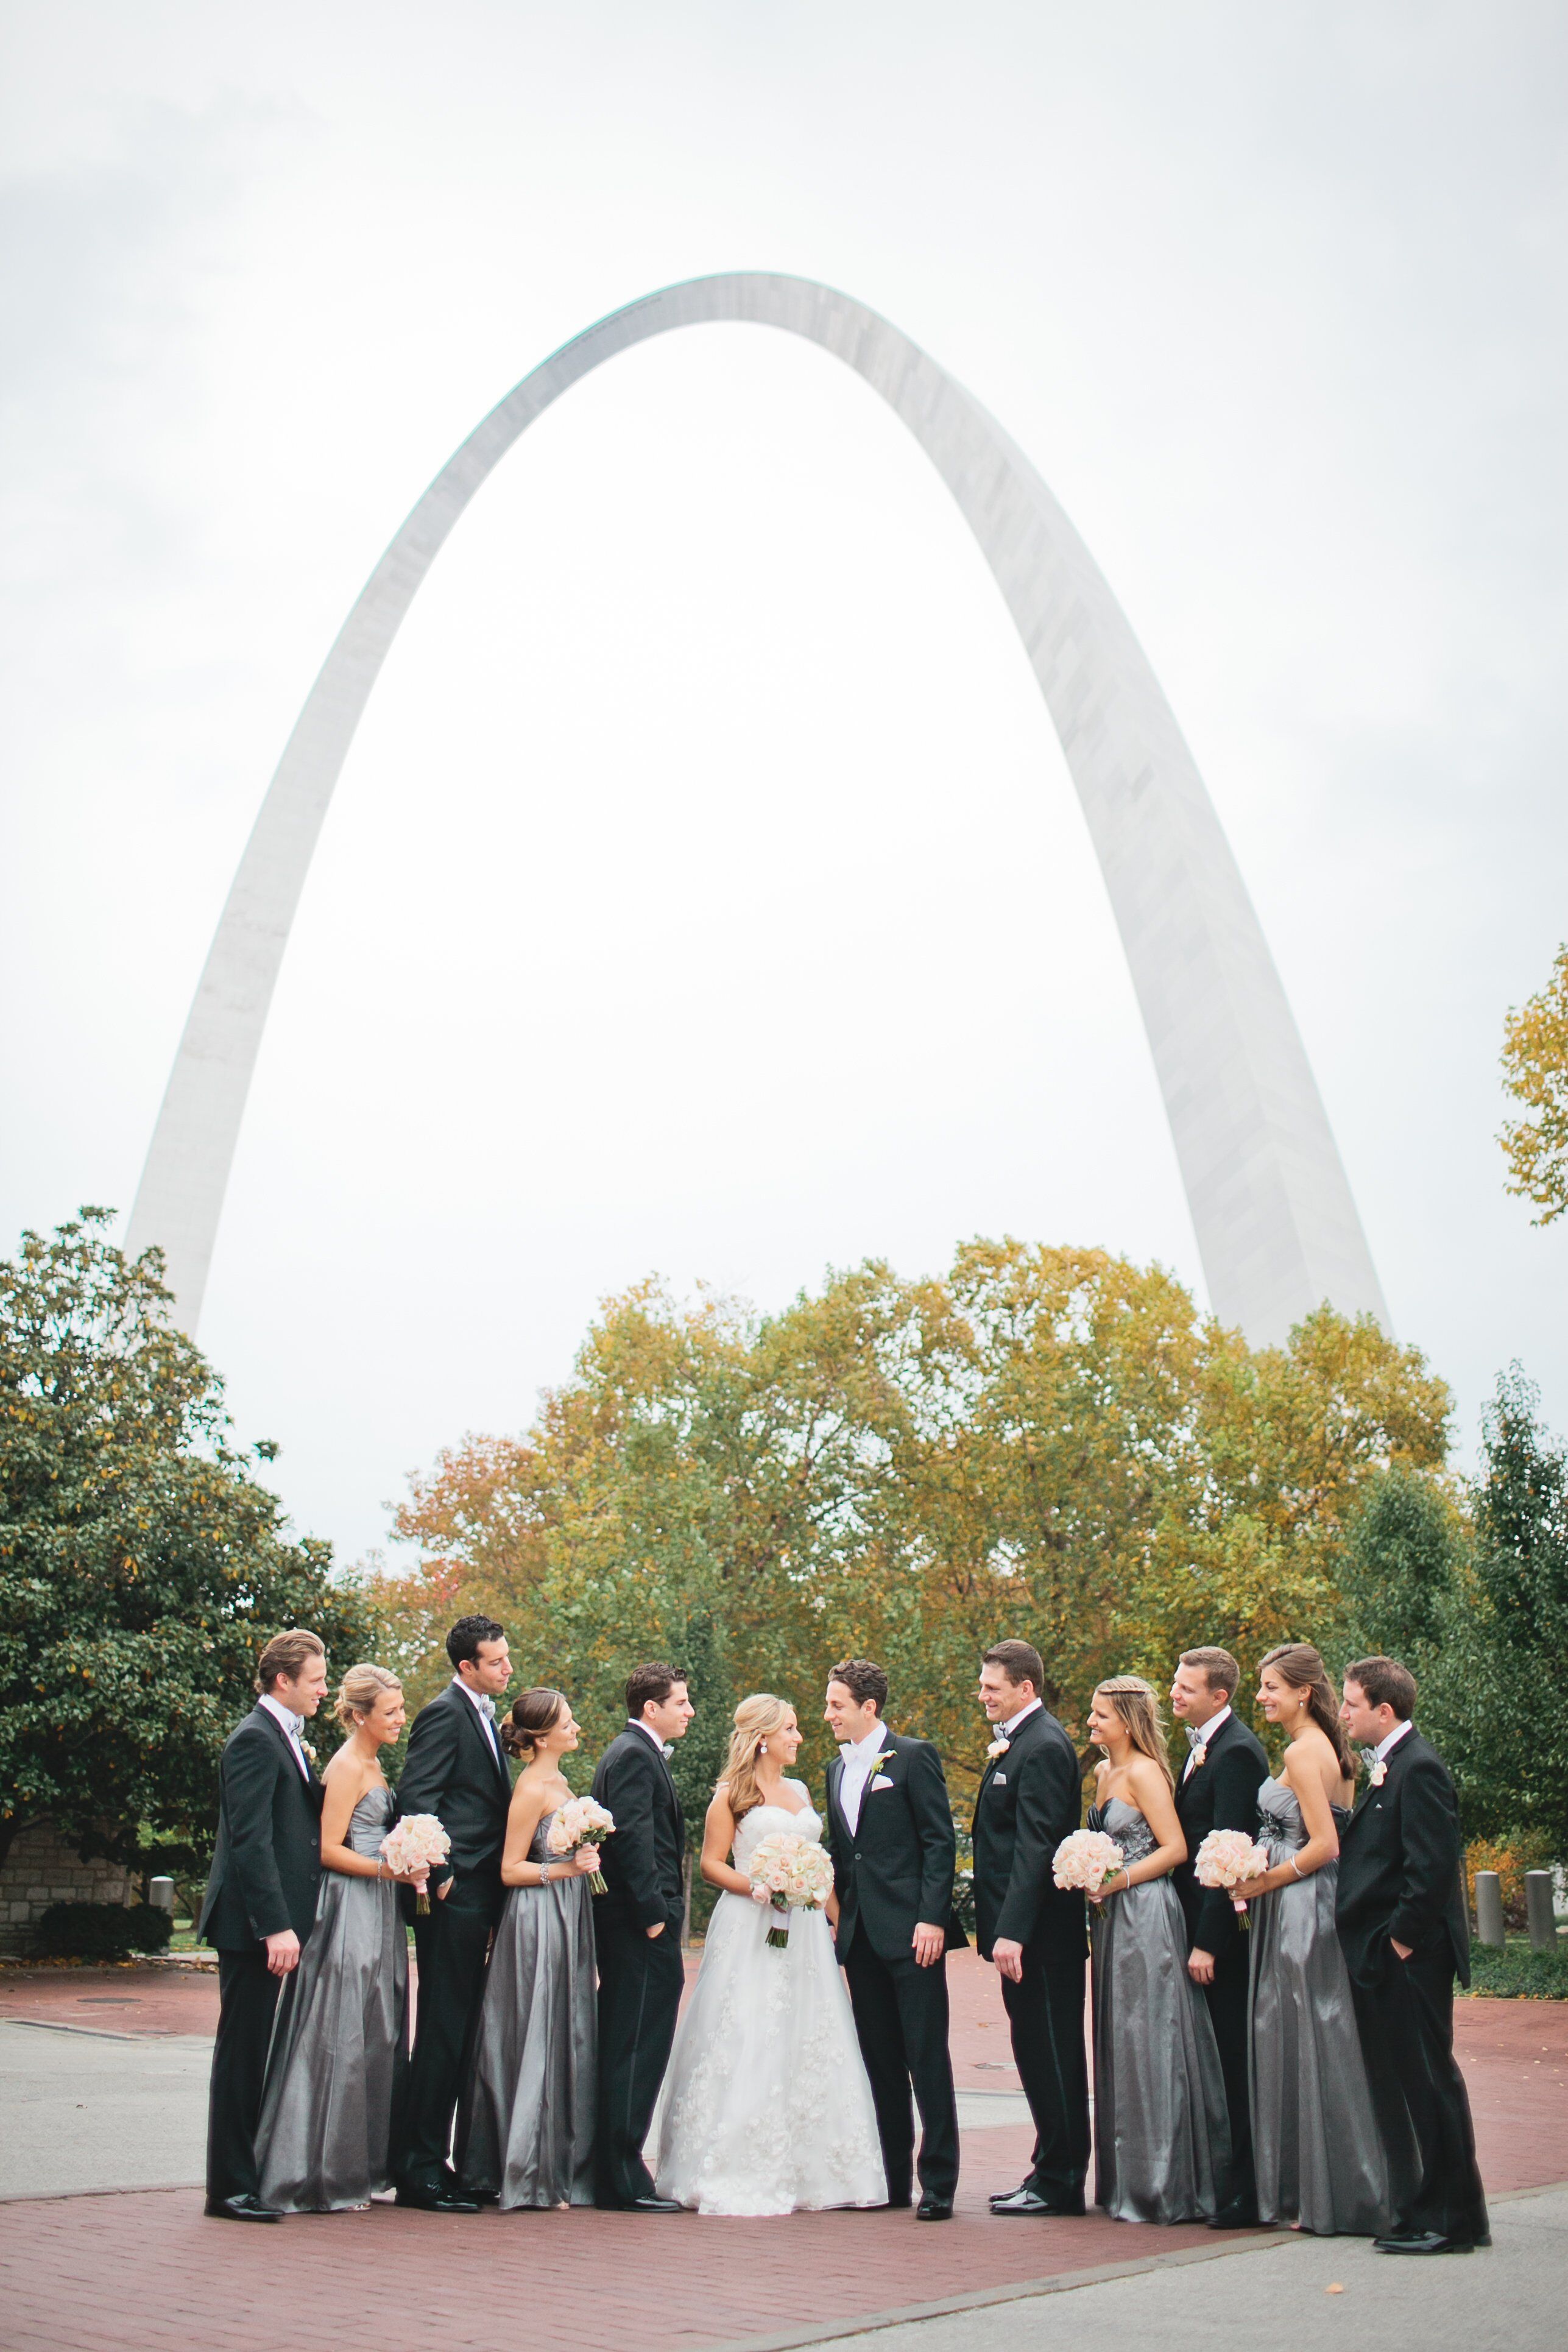 Wedding Party Under the Arch